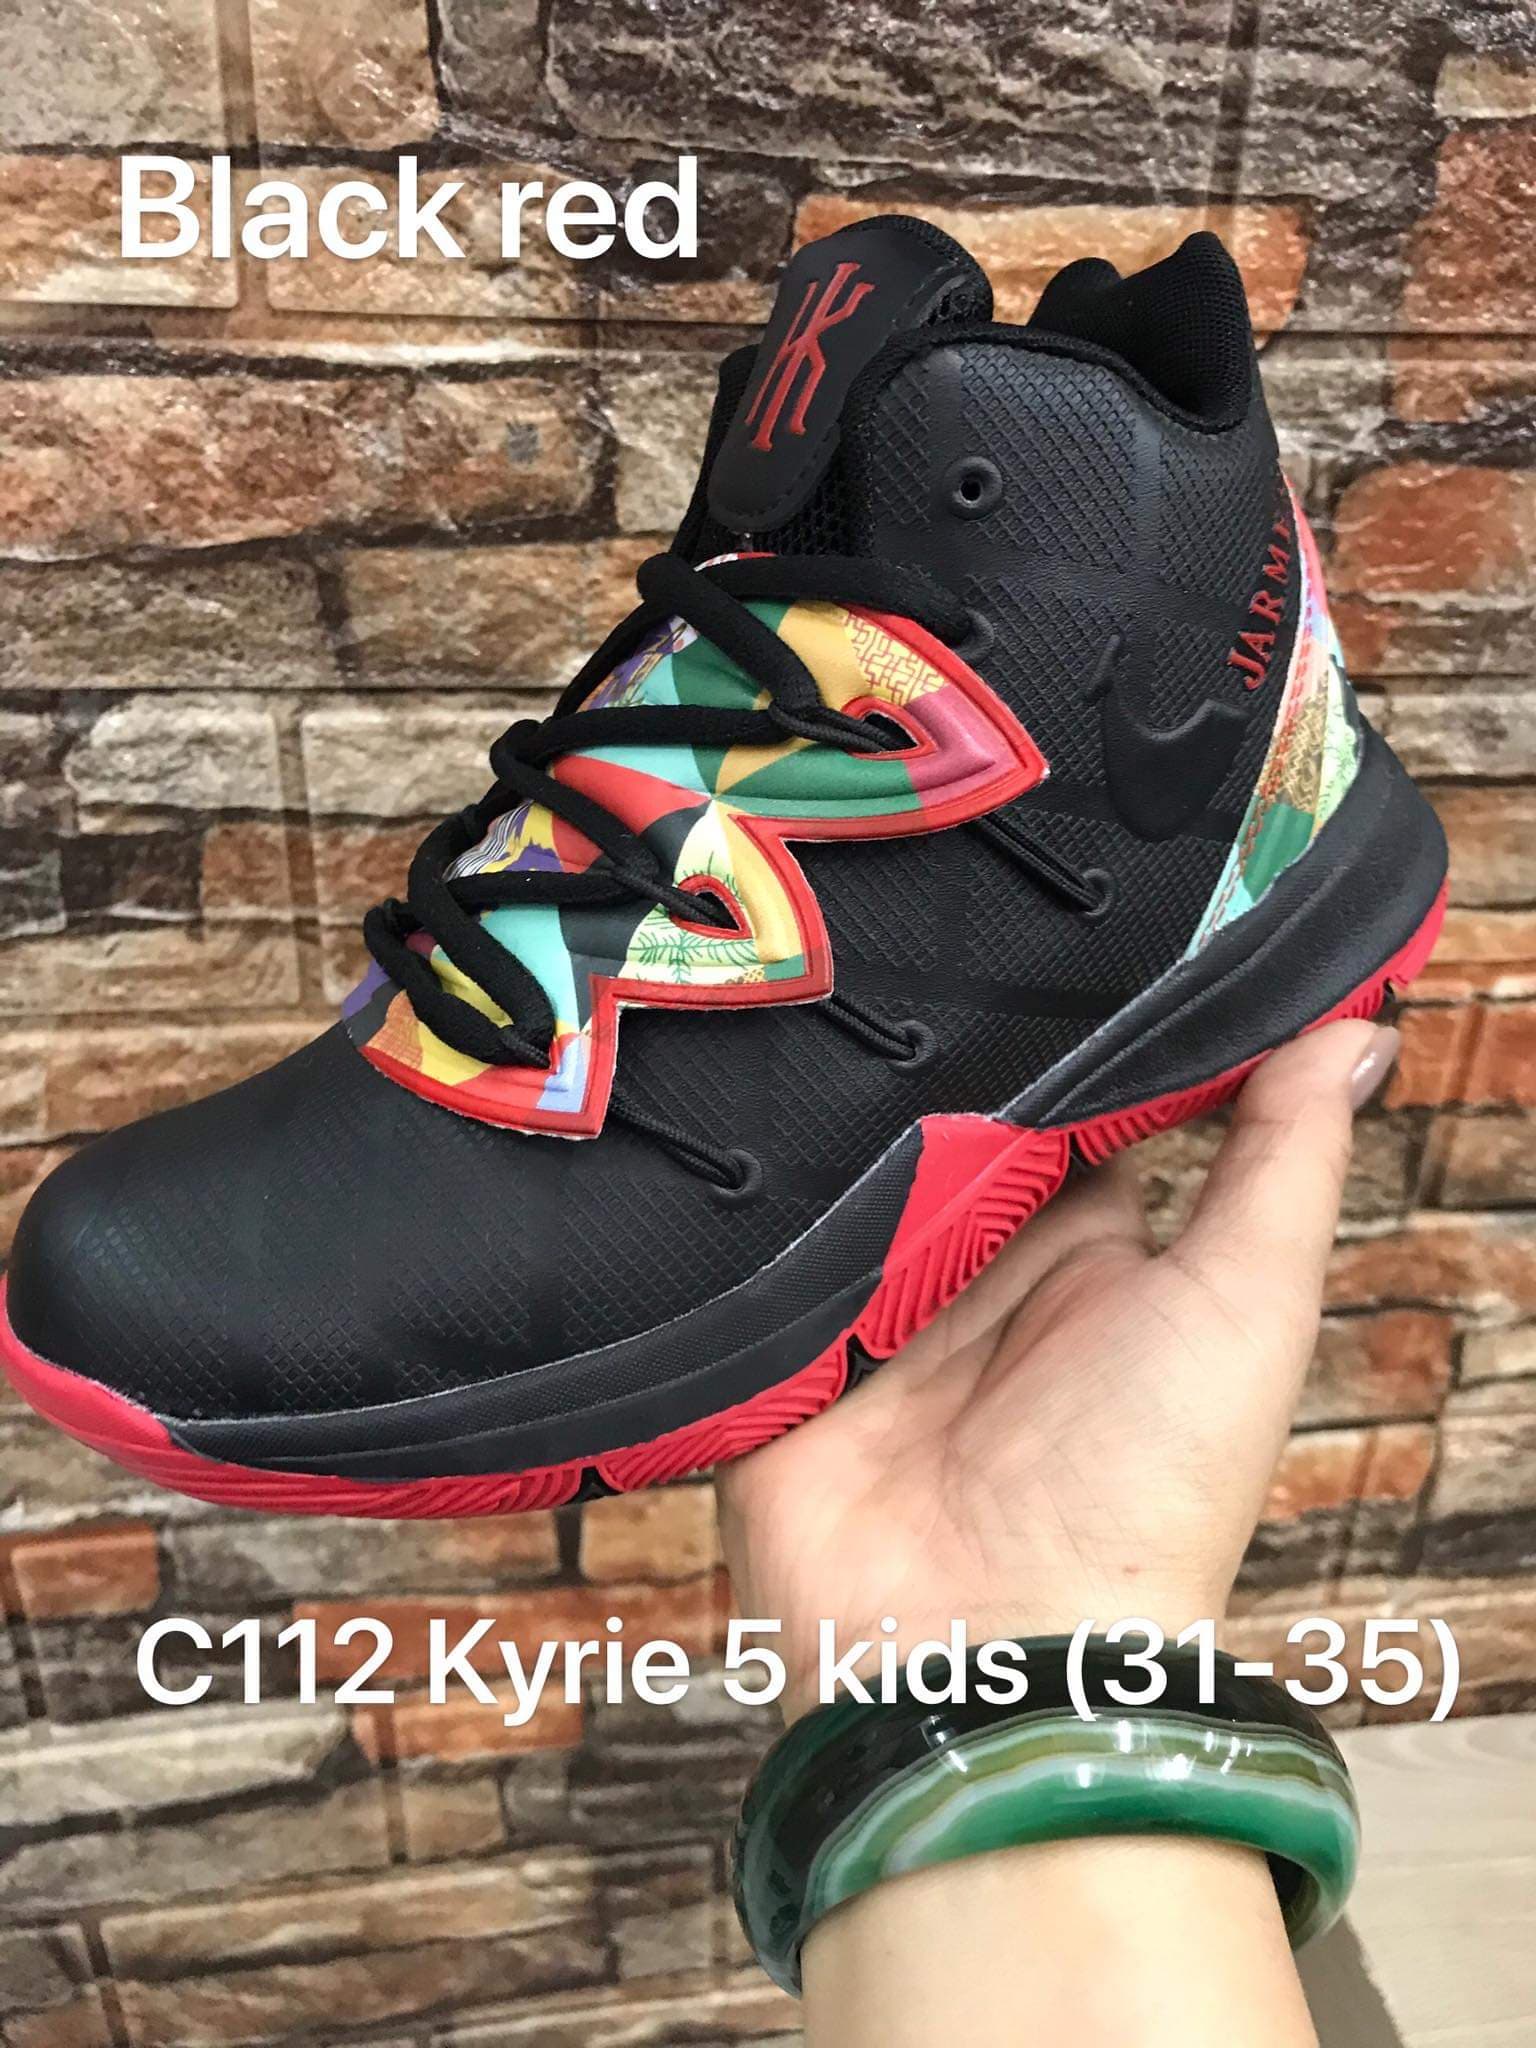 Kyrie 5 shoes for KIDS size 31-35 